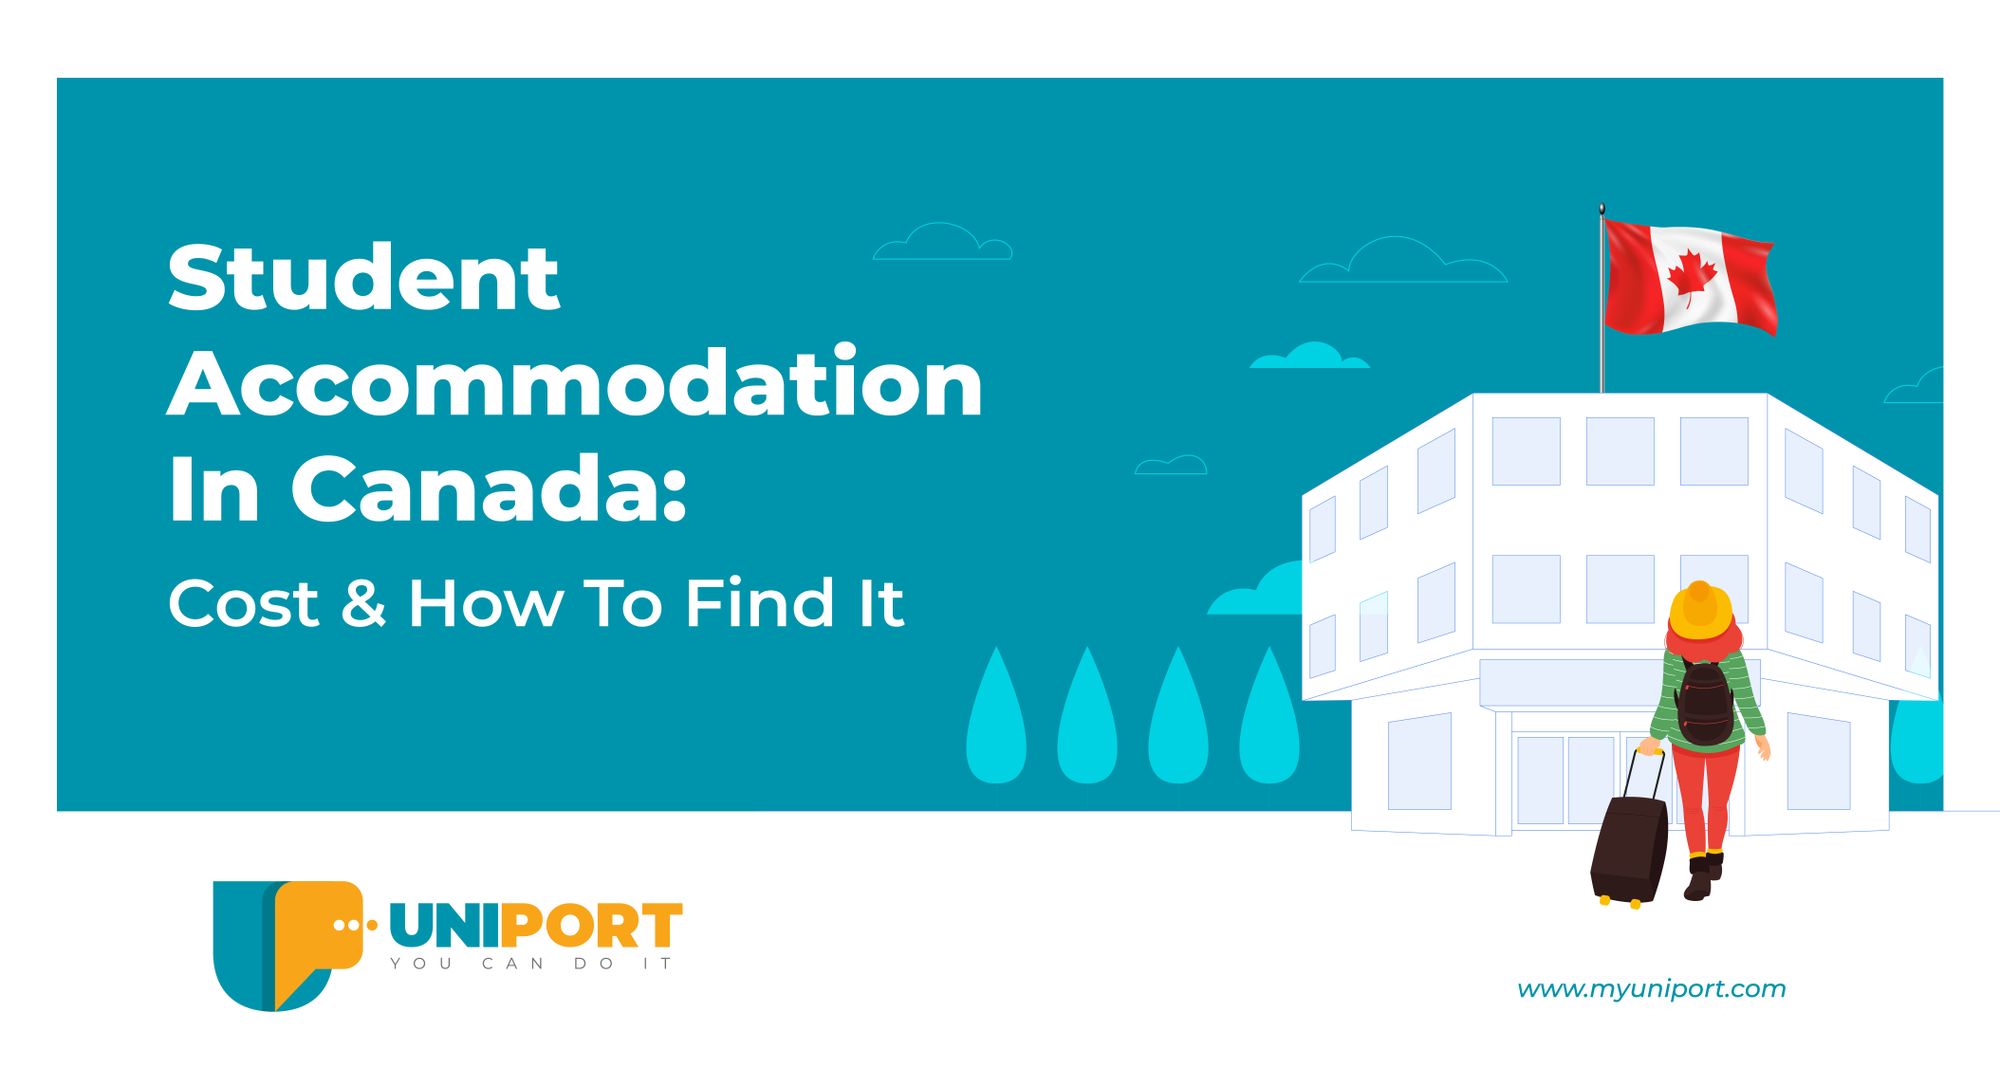 Student Accommodation In Canada: Cost & How To Find It